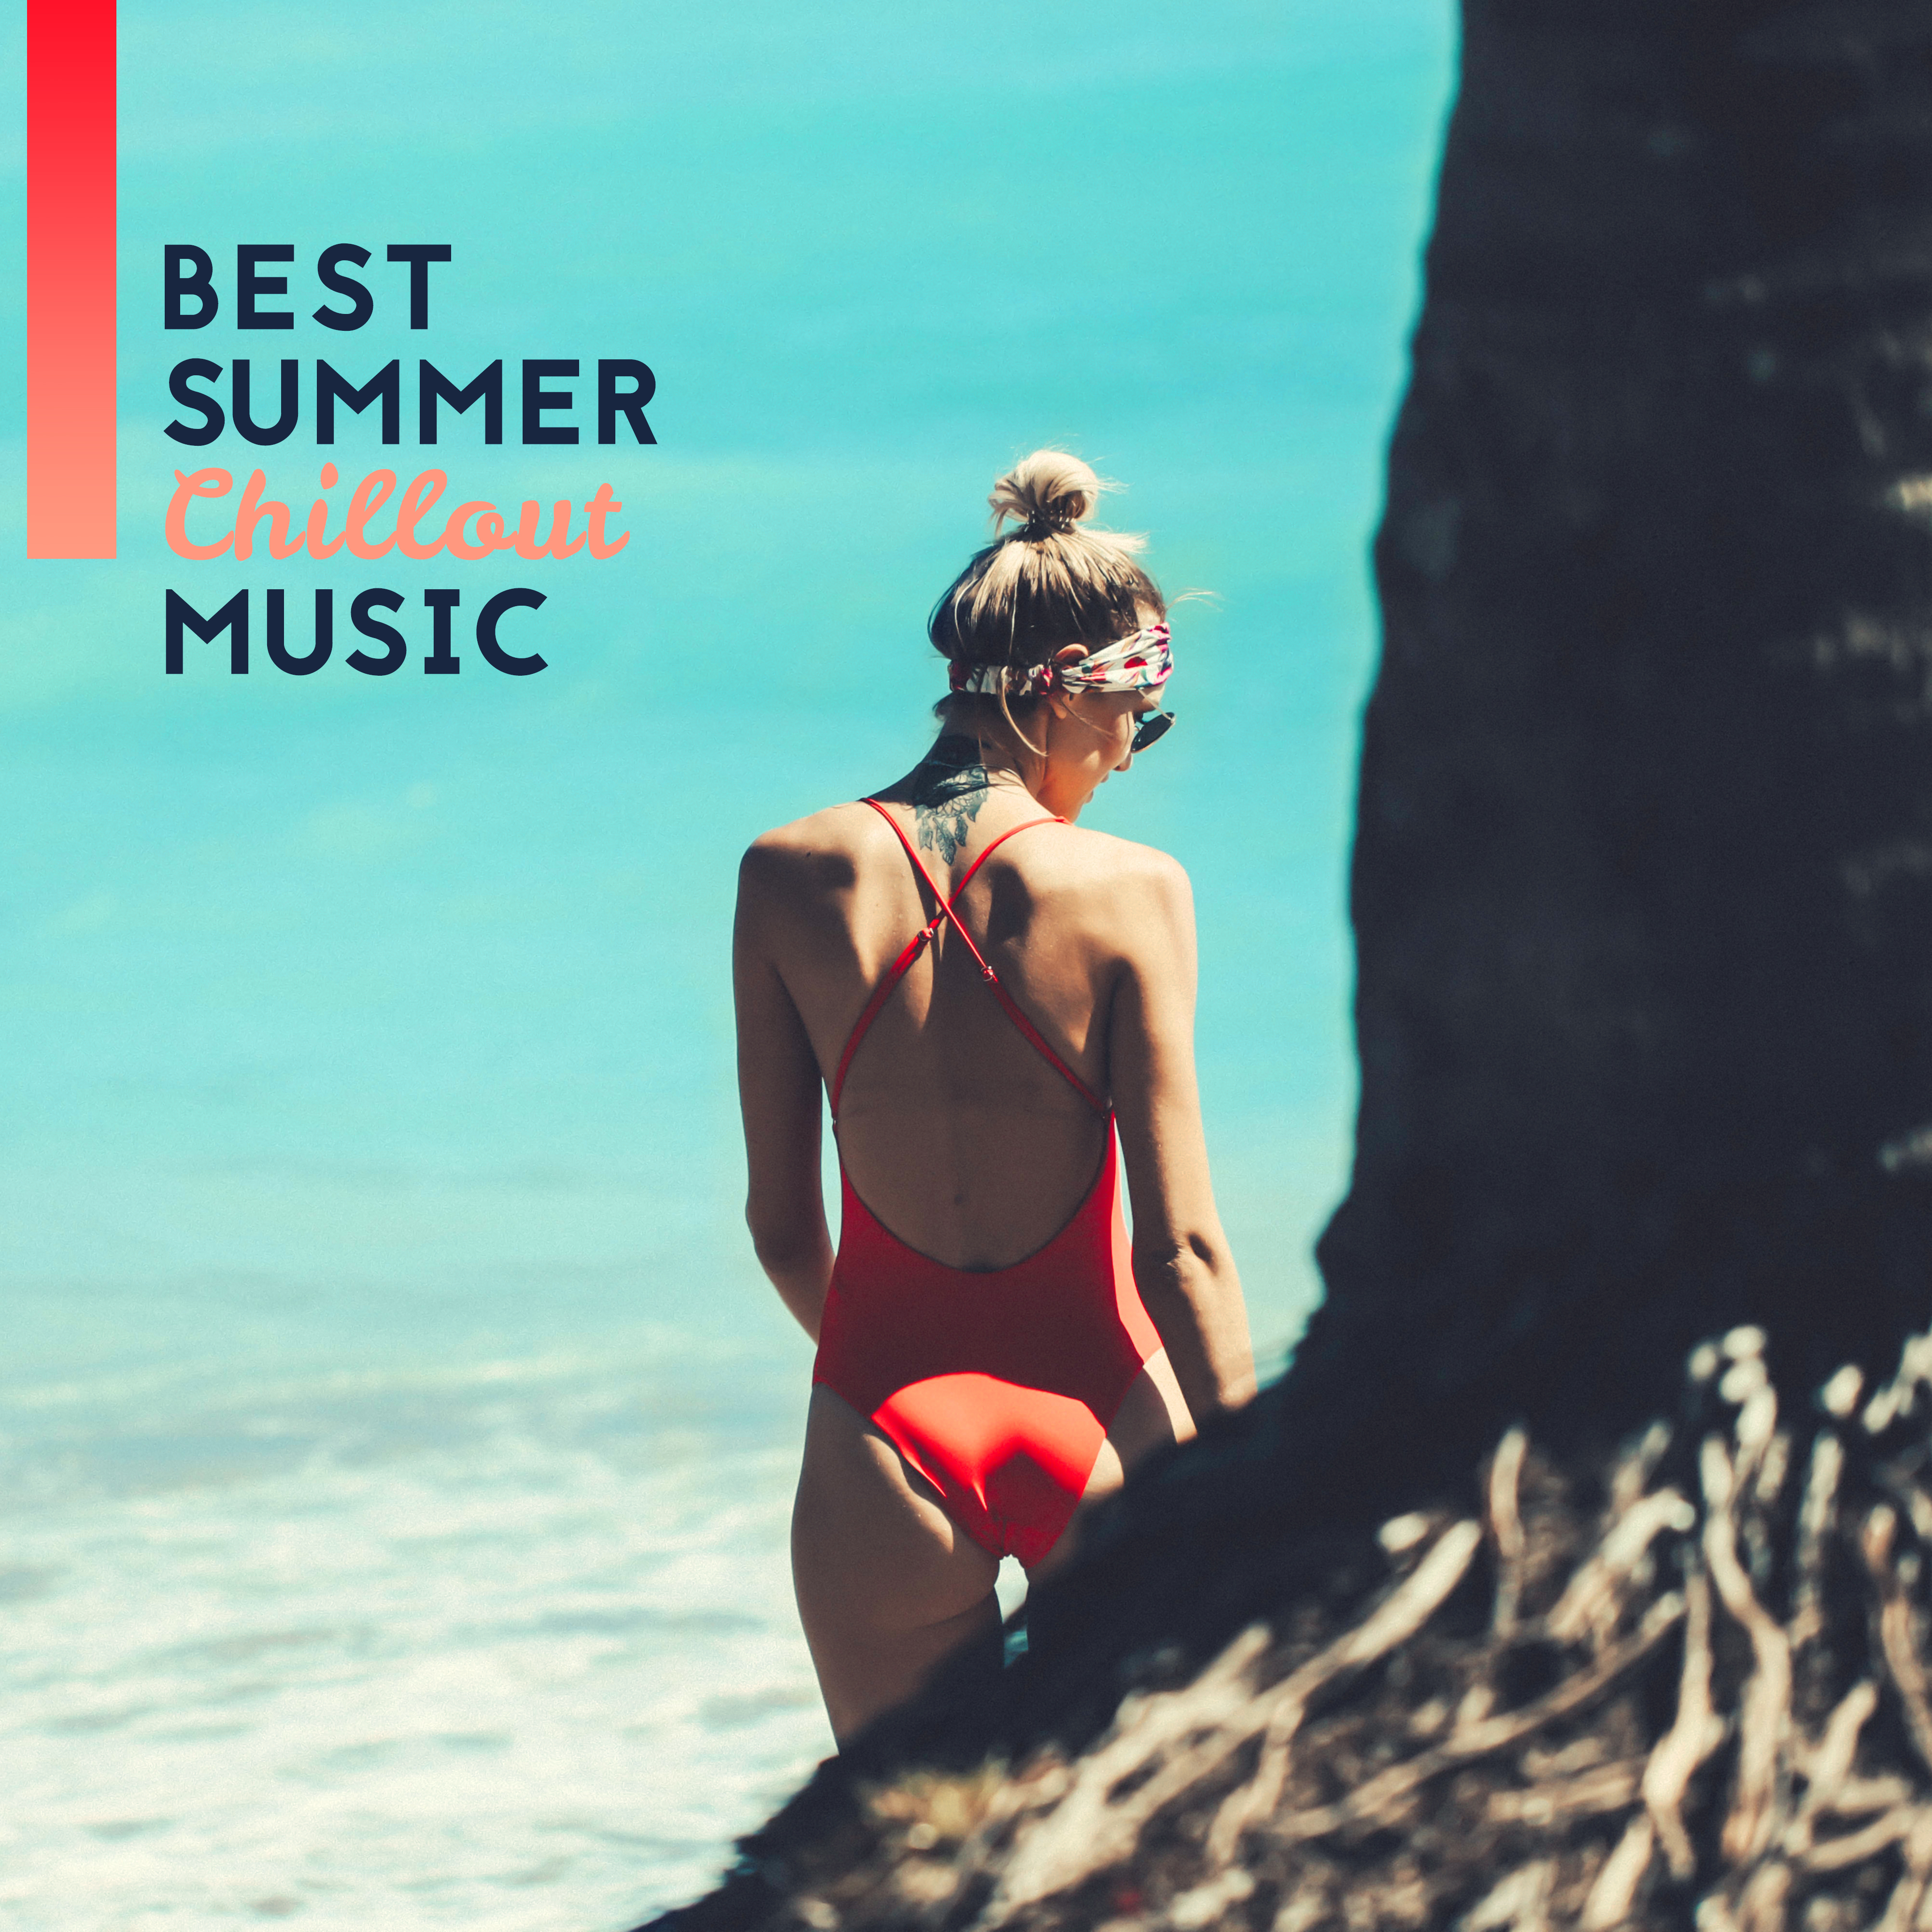 Best Summer Chillout Music